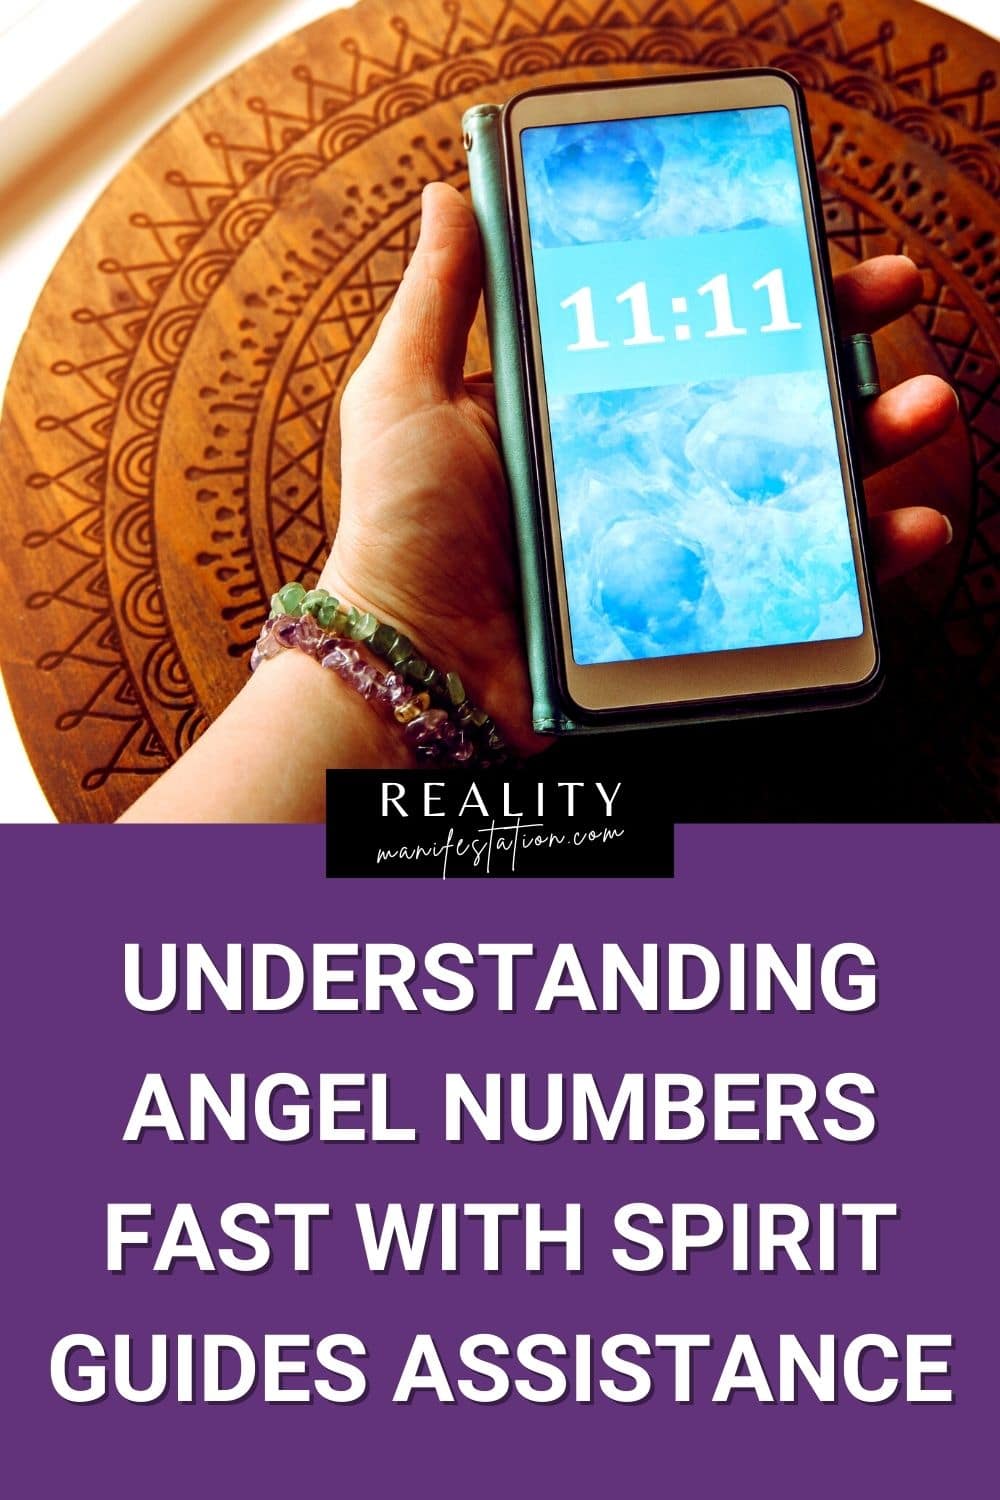 A hand holding a smartphone with a screen save that has 11:11 on it with text underneath saying Find a unique way that isn't covered by most angel number articles for using the assistance of your spirit guides to understand angel numbers.